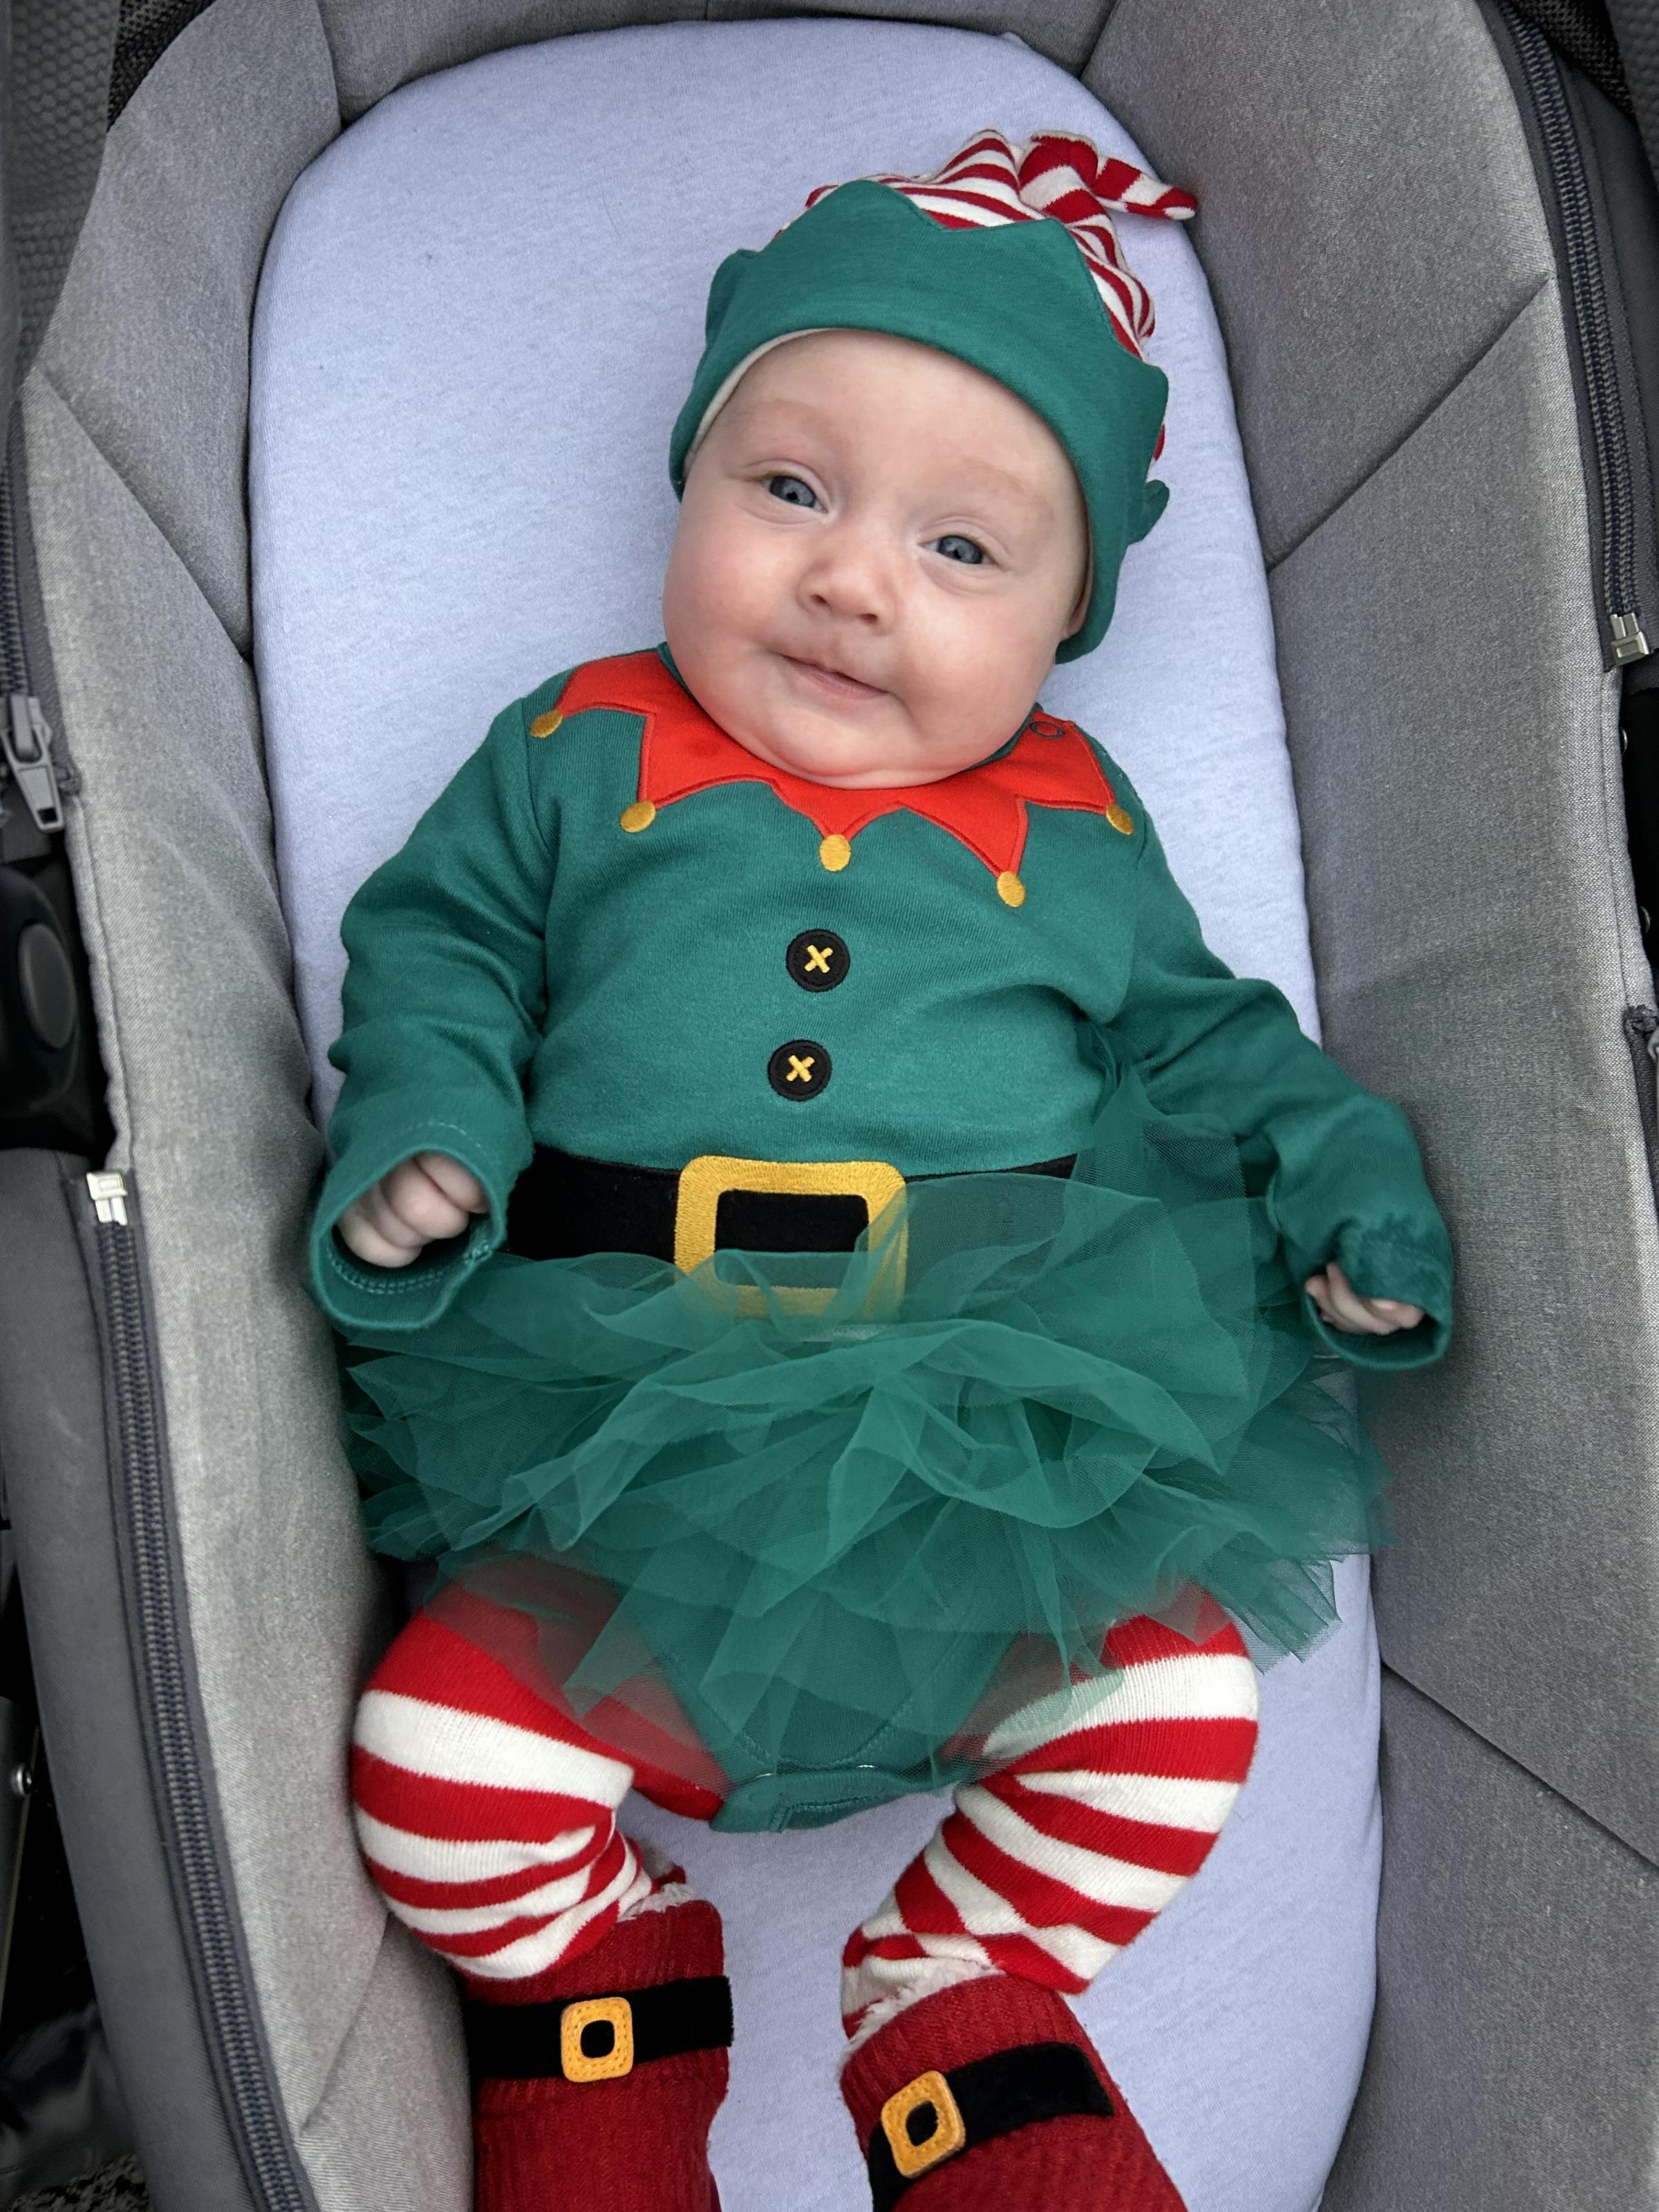 Laura Clews, from Llay: Three-month-old Freya was six weeks early, so we are celebrating her as being a Christmas elf on her first Christmas!